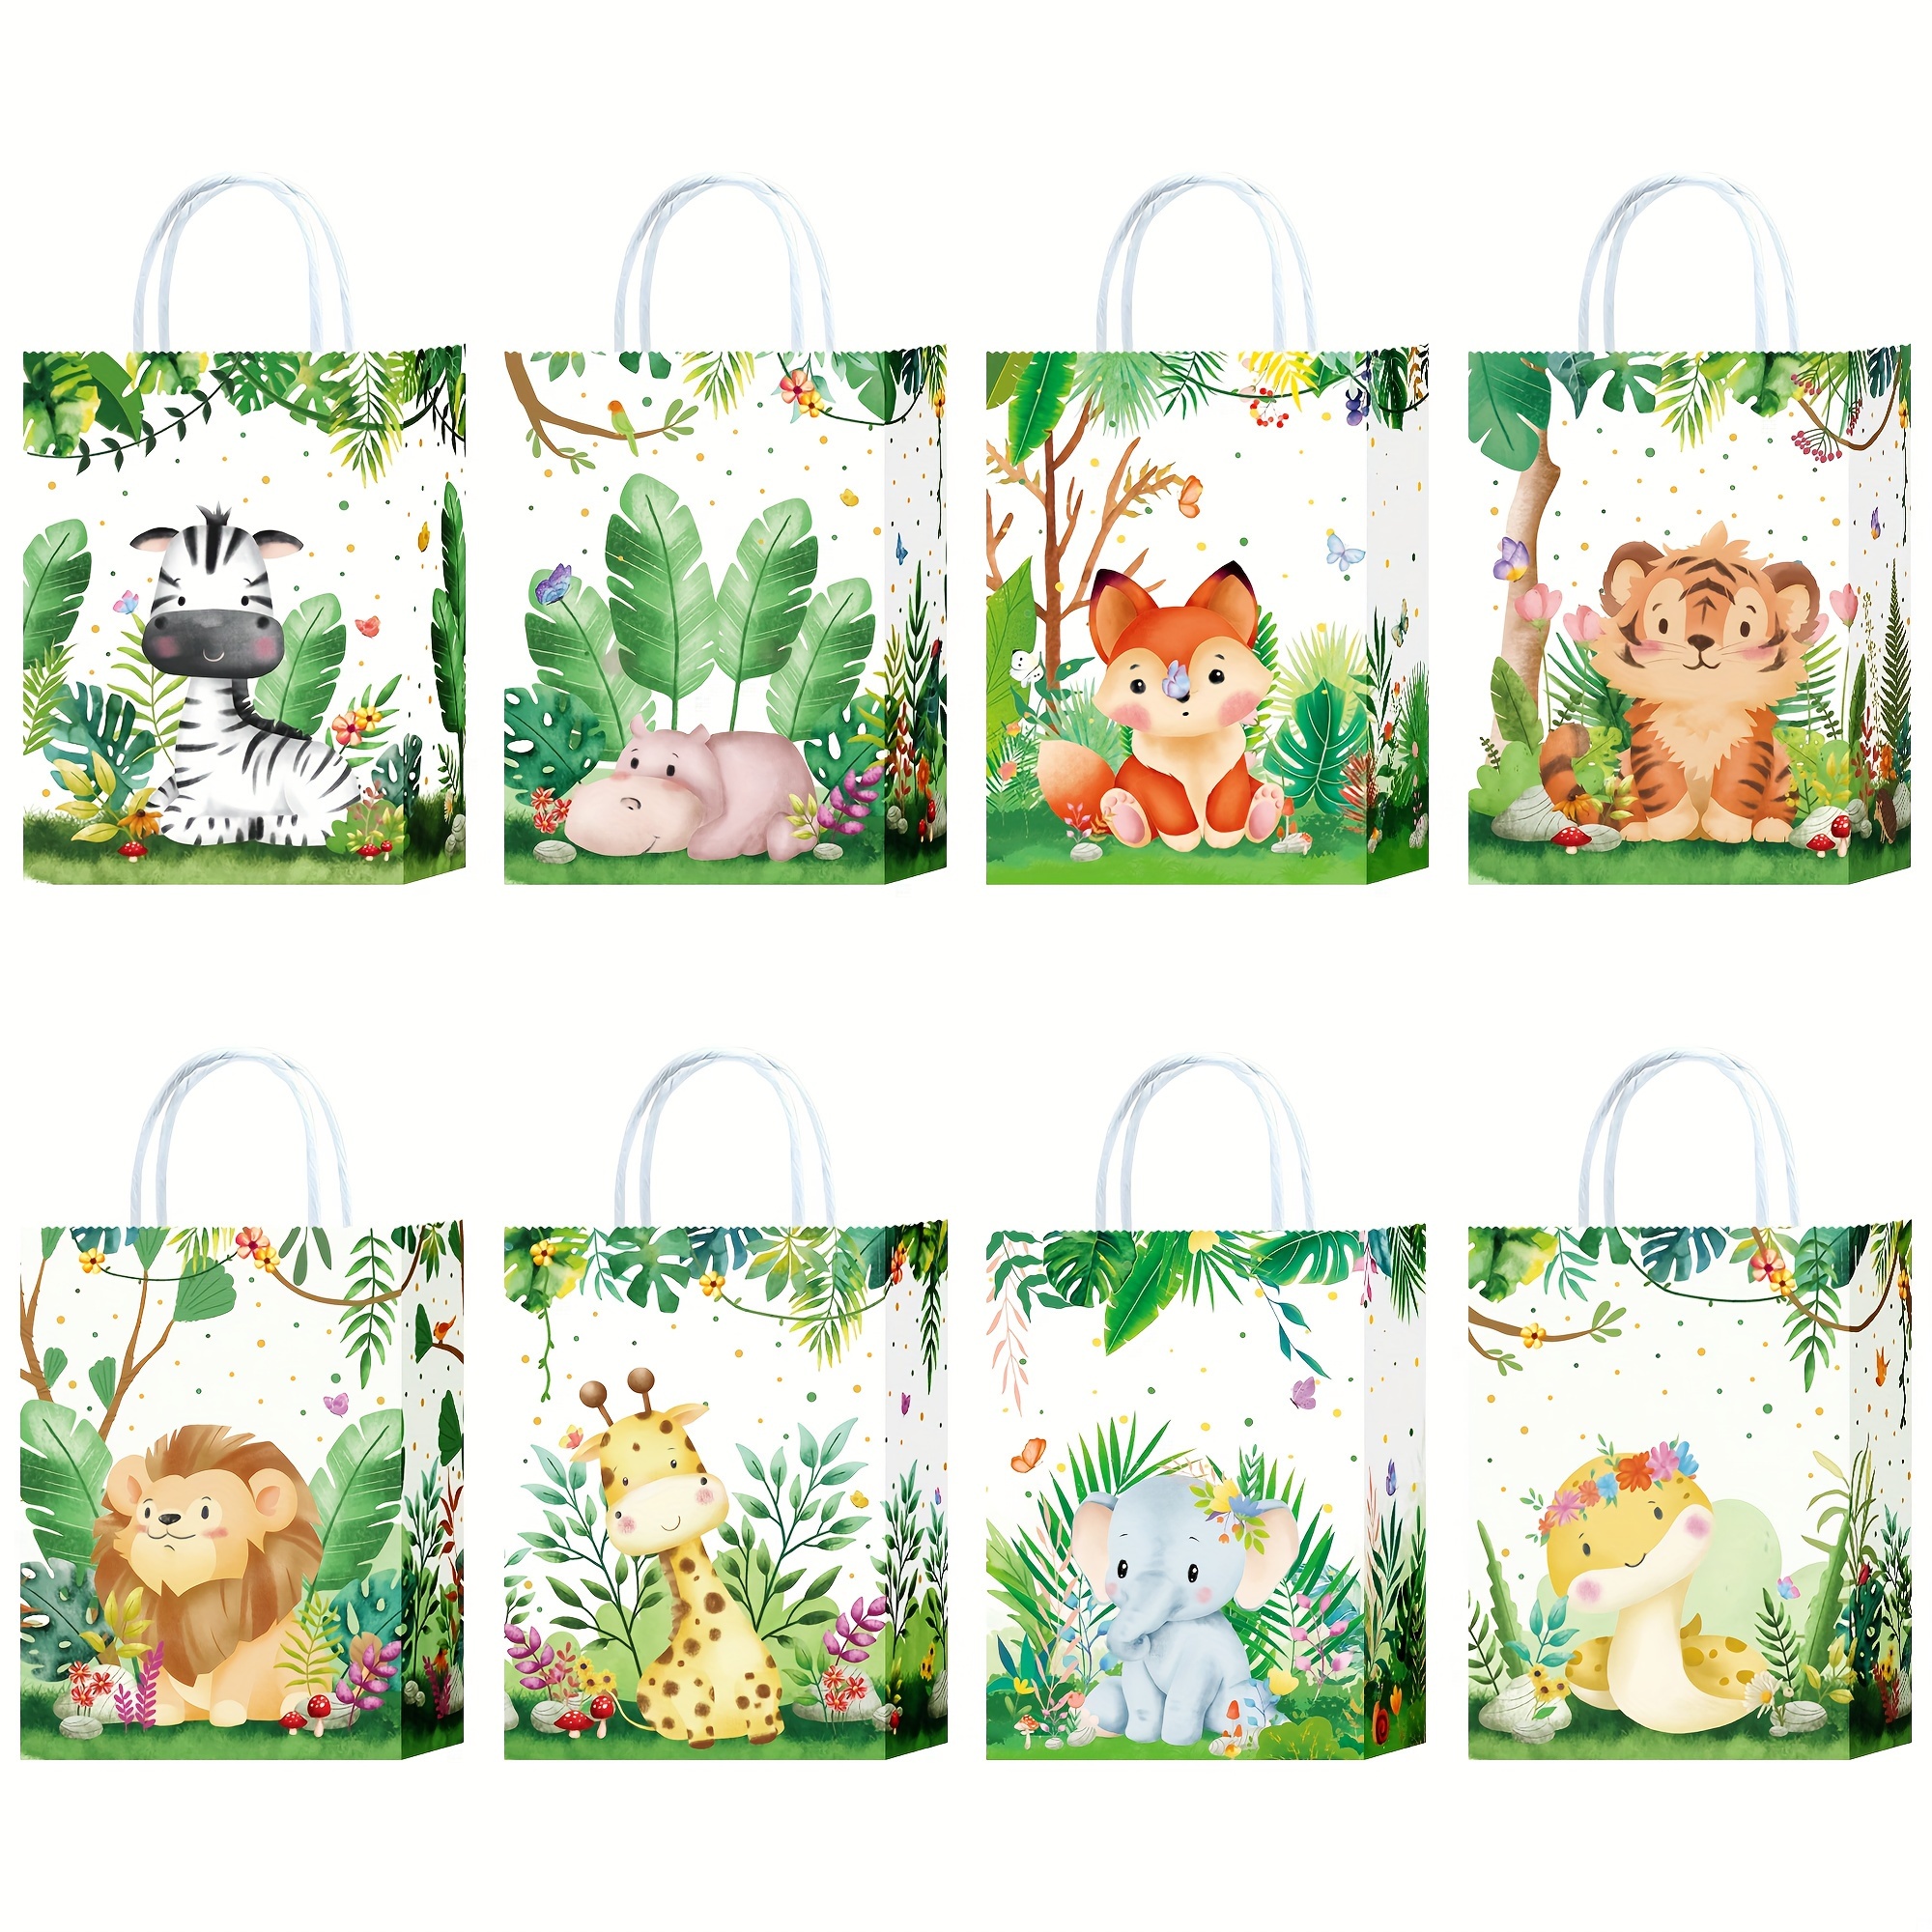 

8/16/24/32pcs Pieces Safari Goodie Bags Jungle Animals Party Favor Bags With Handles Zoo Animals Print Candy Bags Woodland Gift Bags For Baby Shower Wedding Birthday Jungle Themed Party Supplies